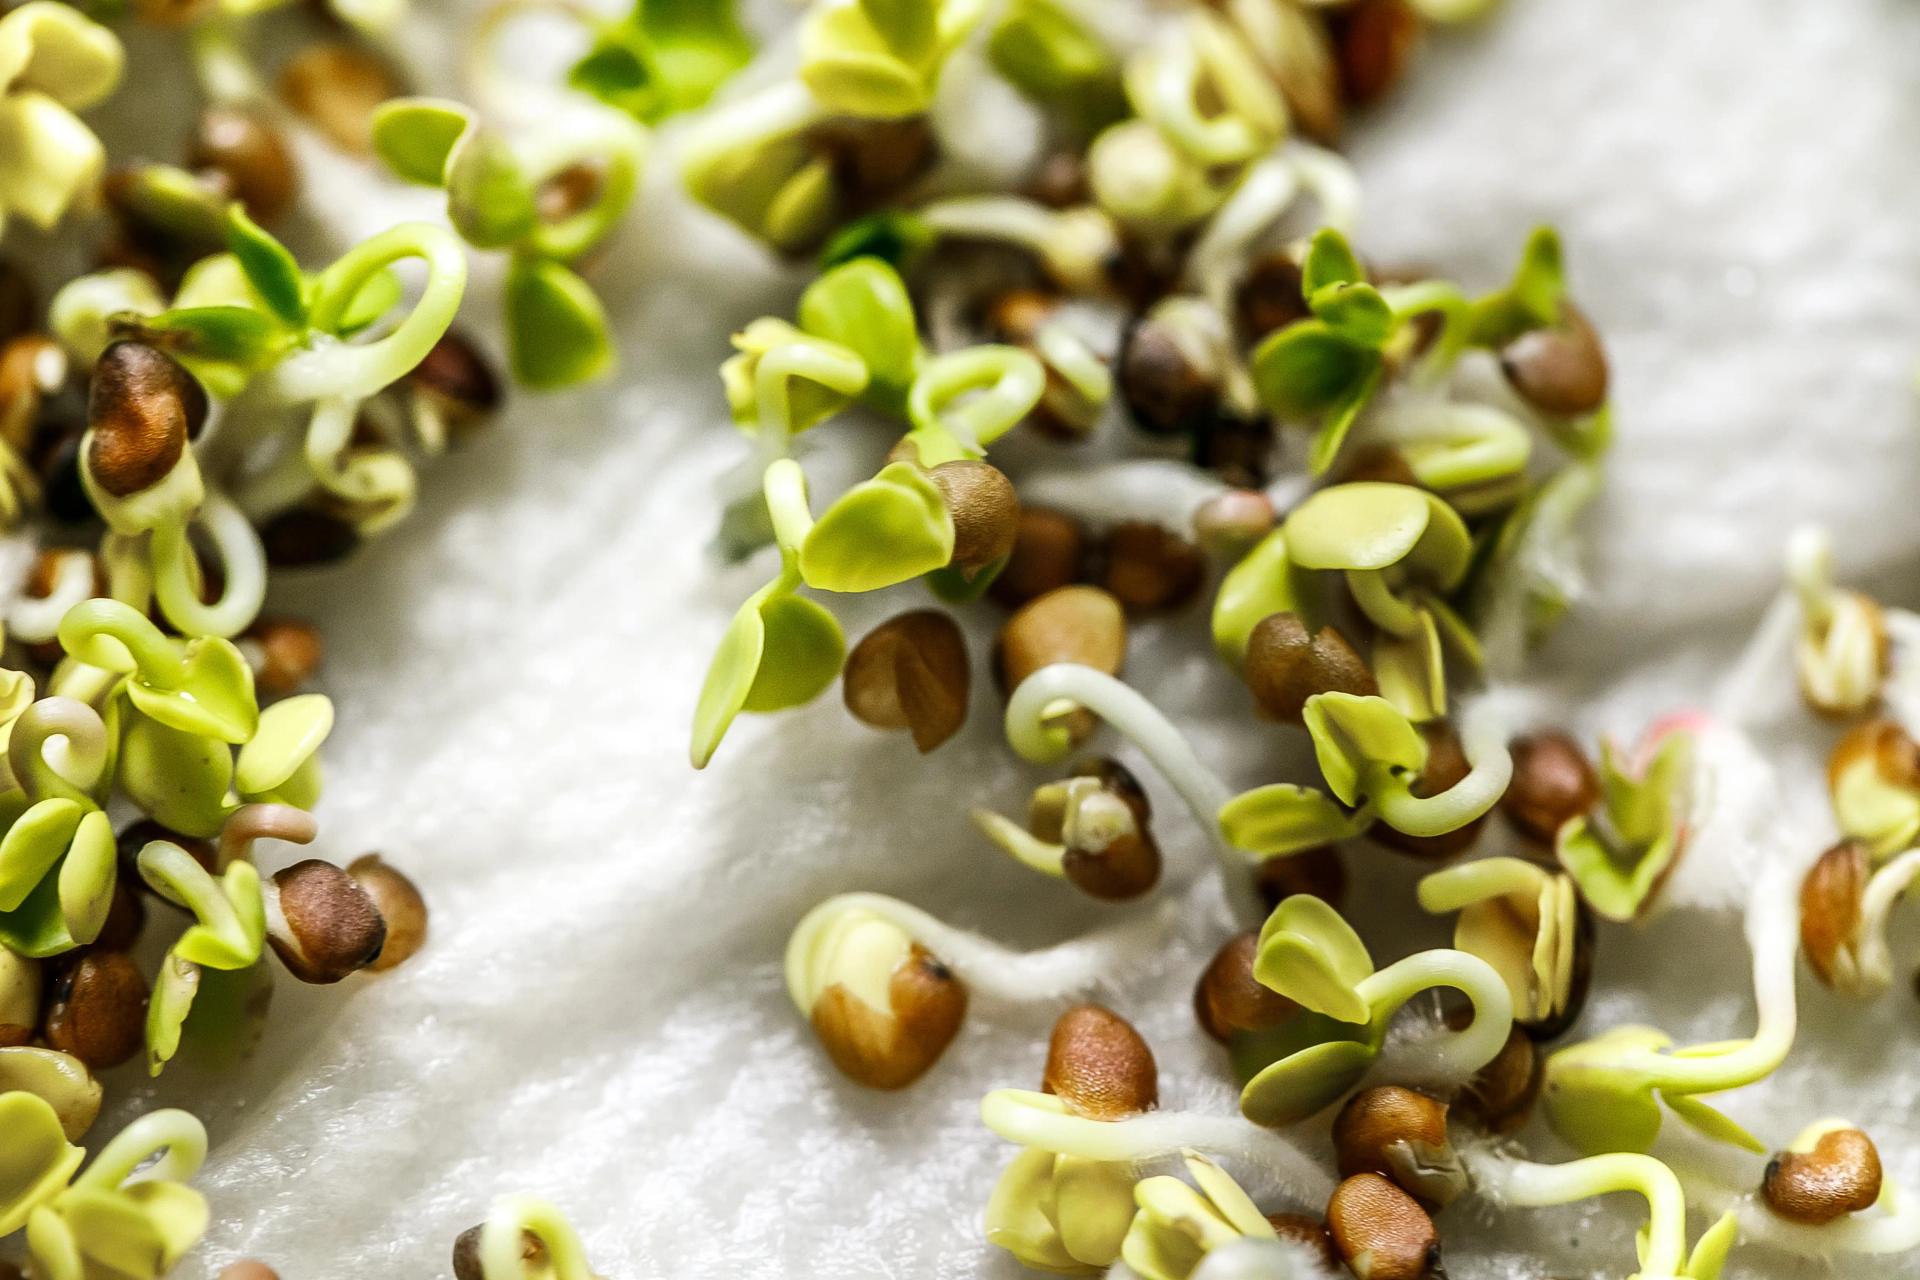 Sprouting Seeds on a Paper Towel